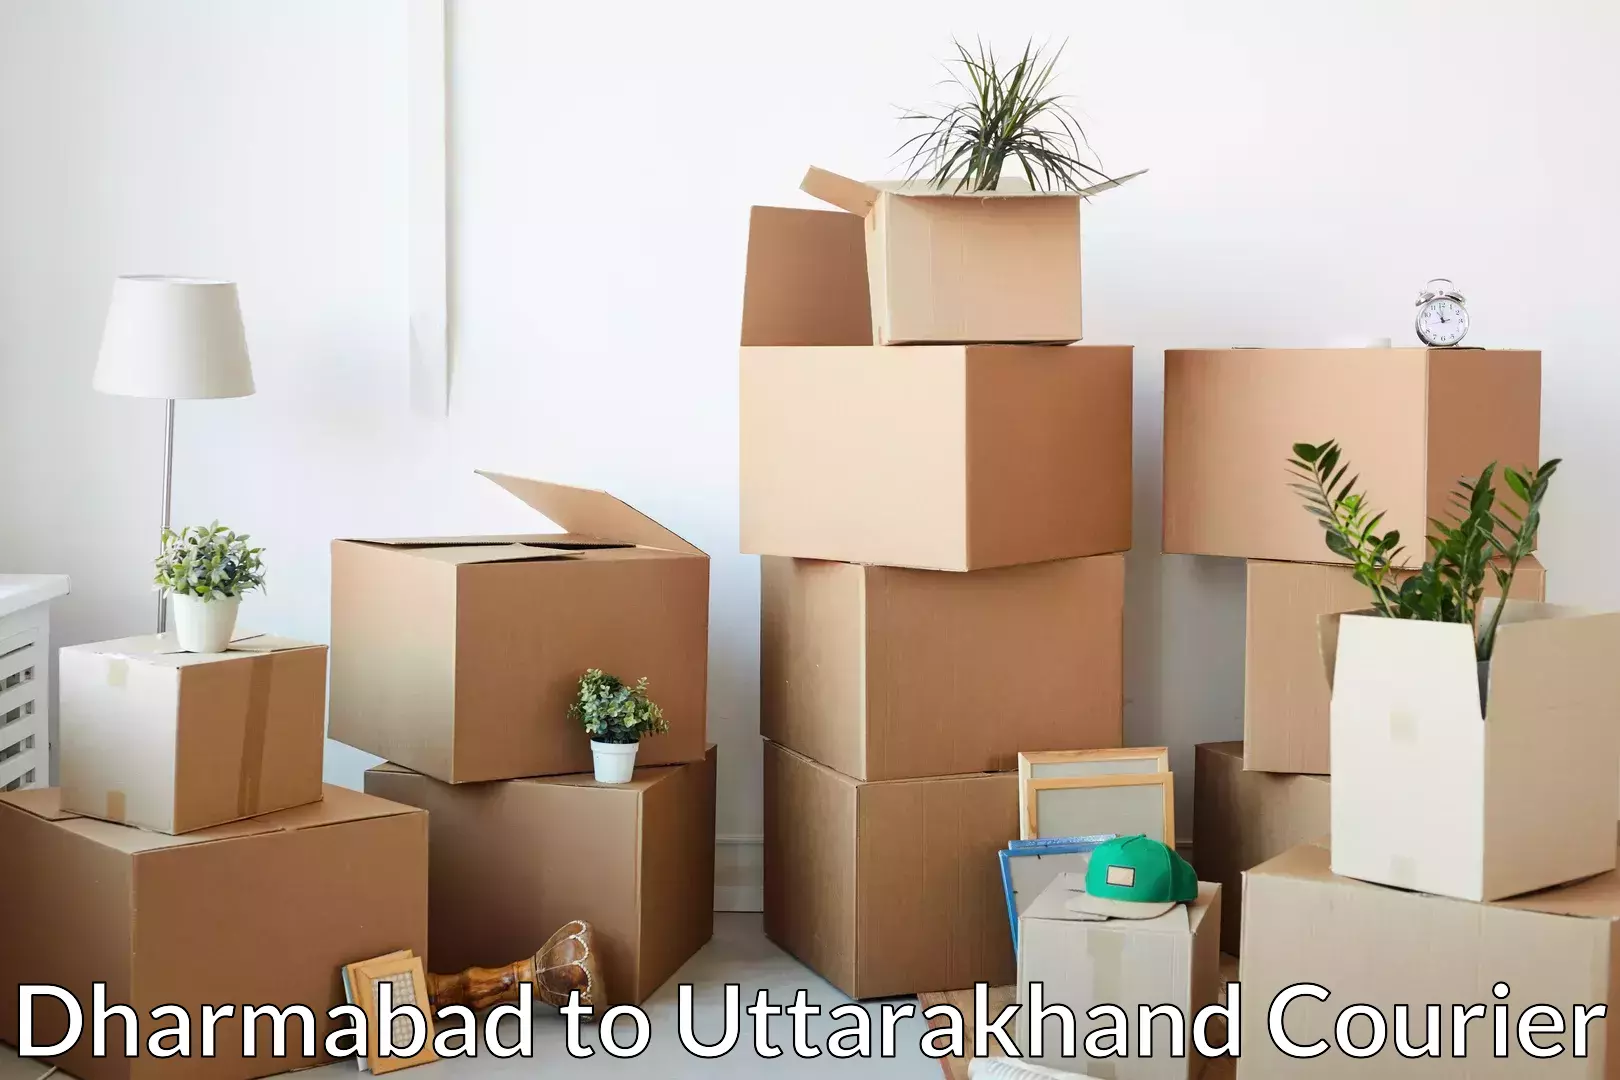 Quality relocation services in Dharmabad to Uttarakhand